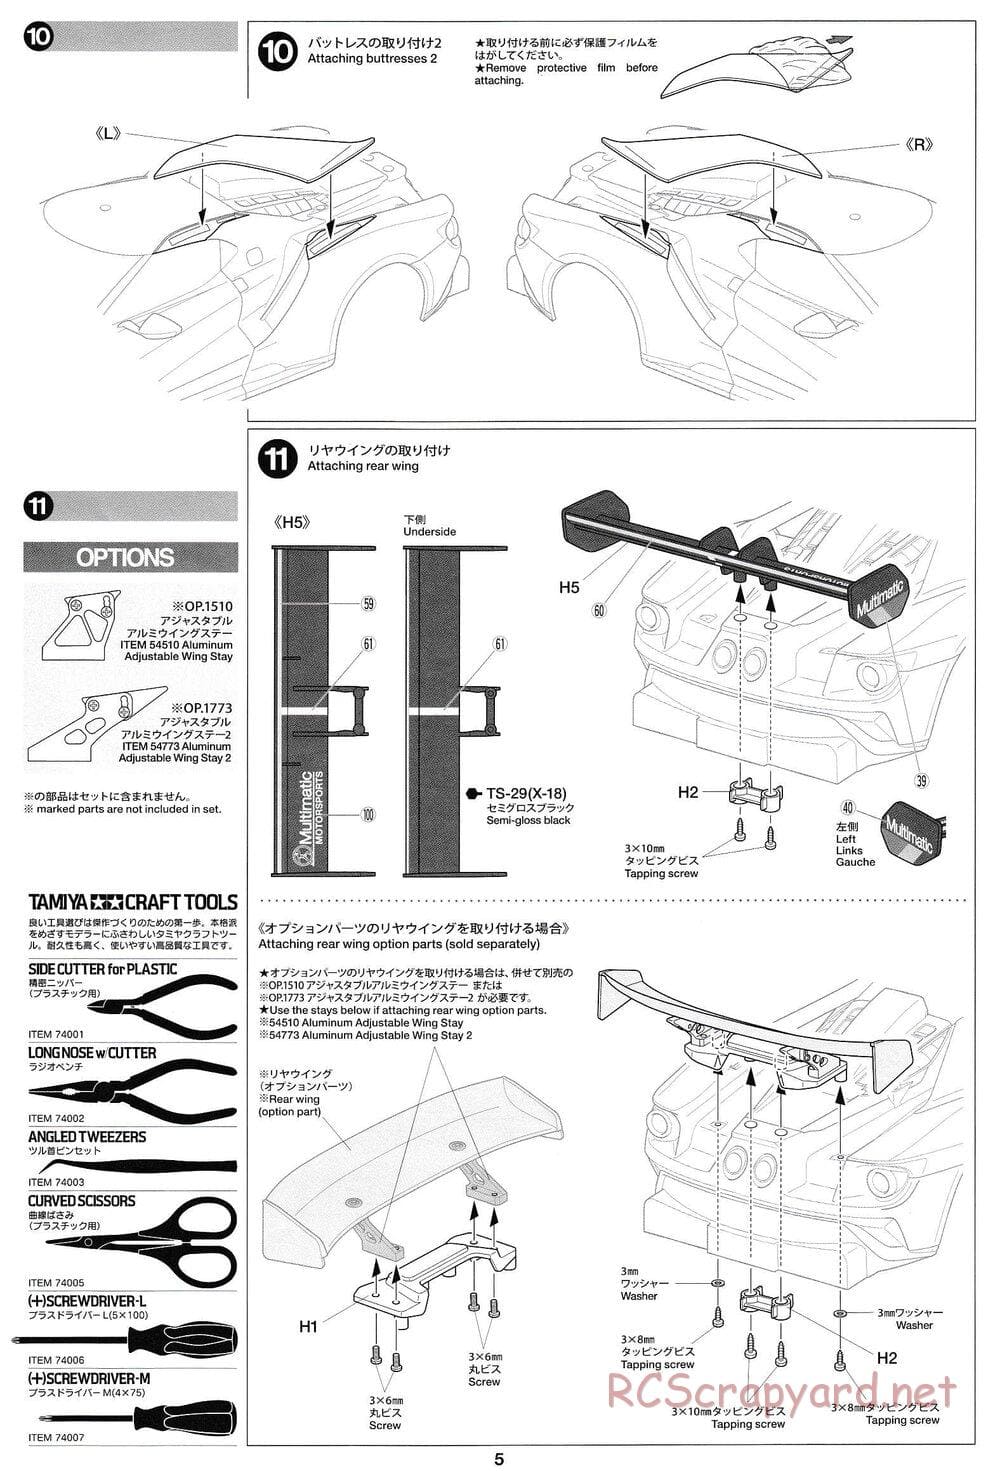 Tamiya - 2020 Ford GT Mk.II - TT-02 Chassis - Body Manual - Page 5